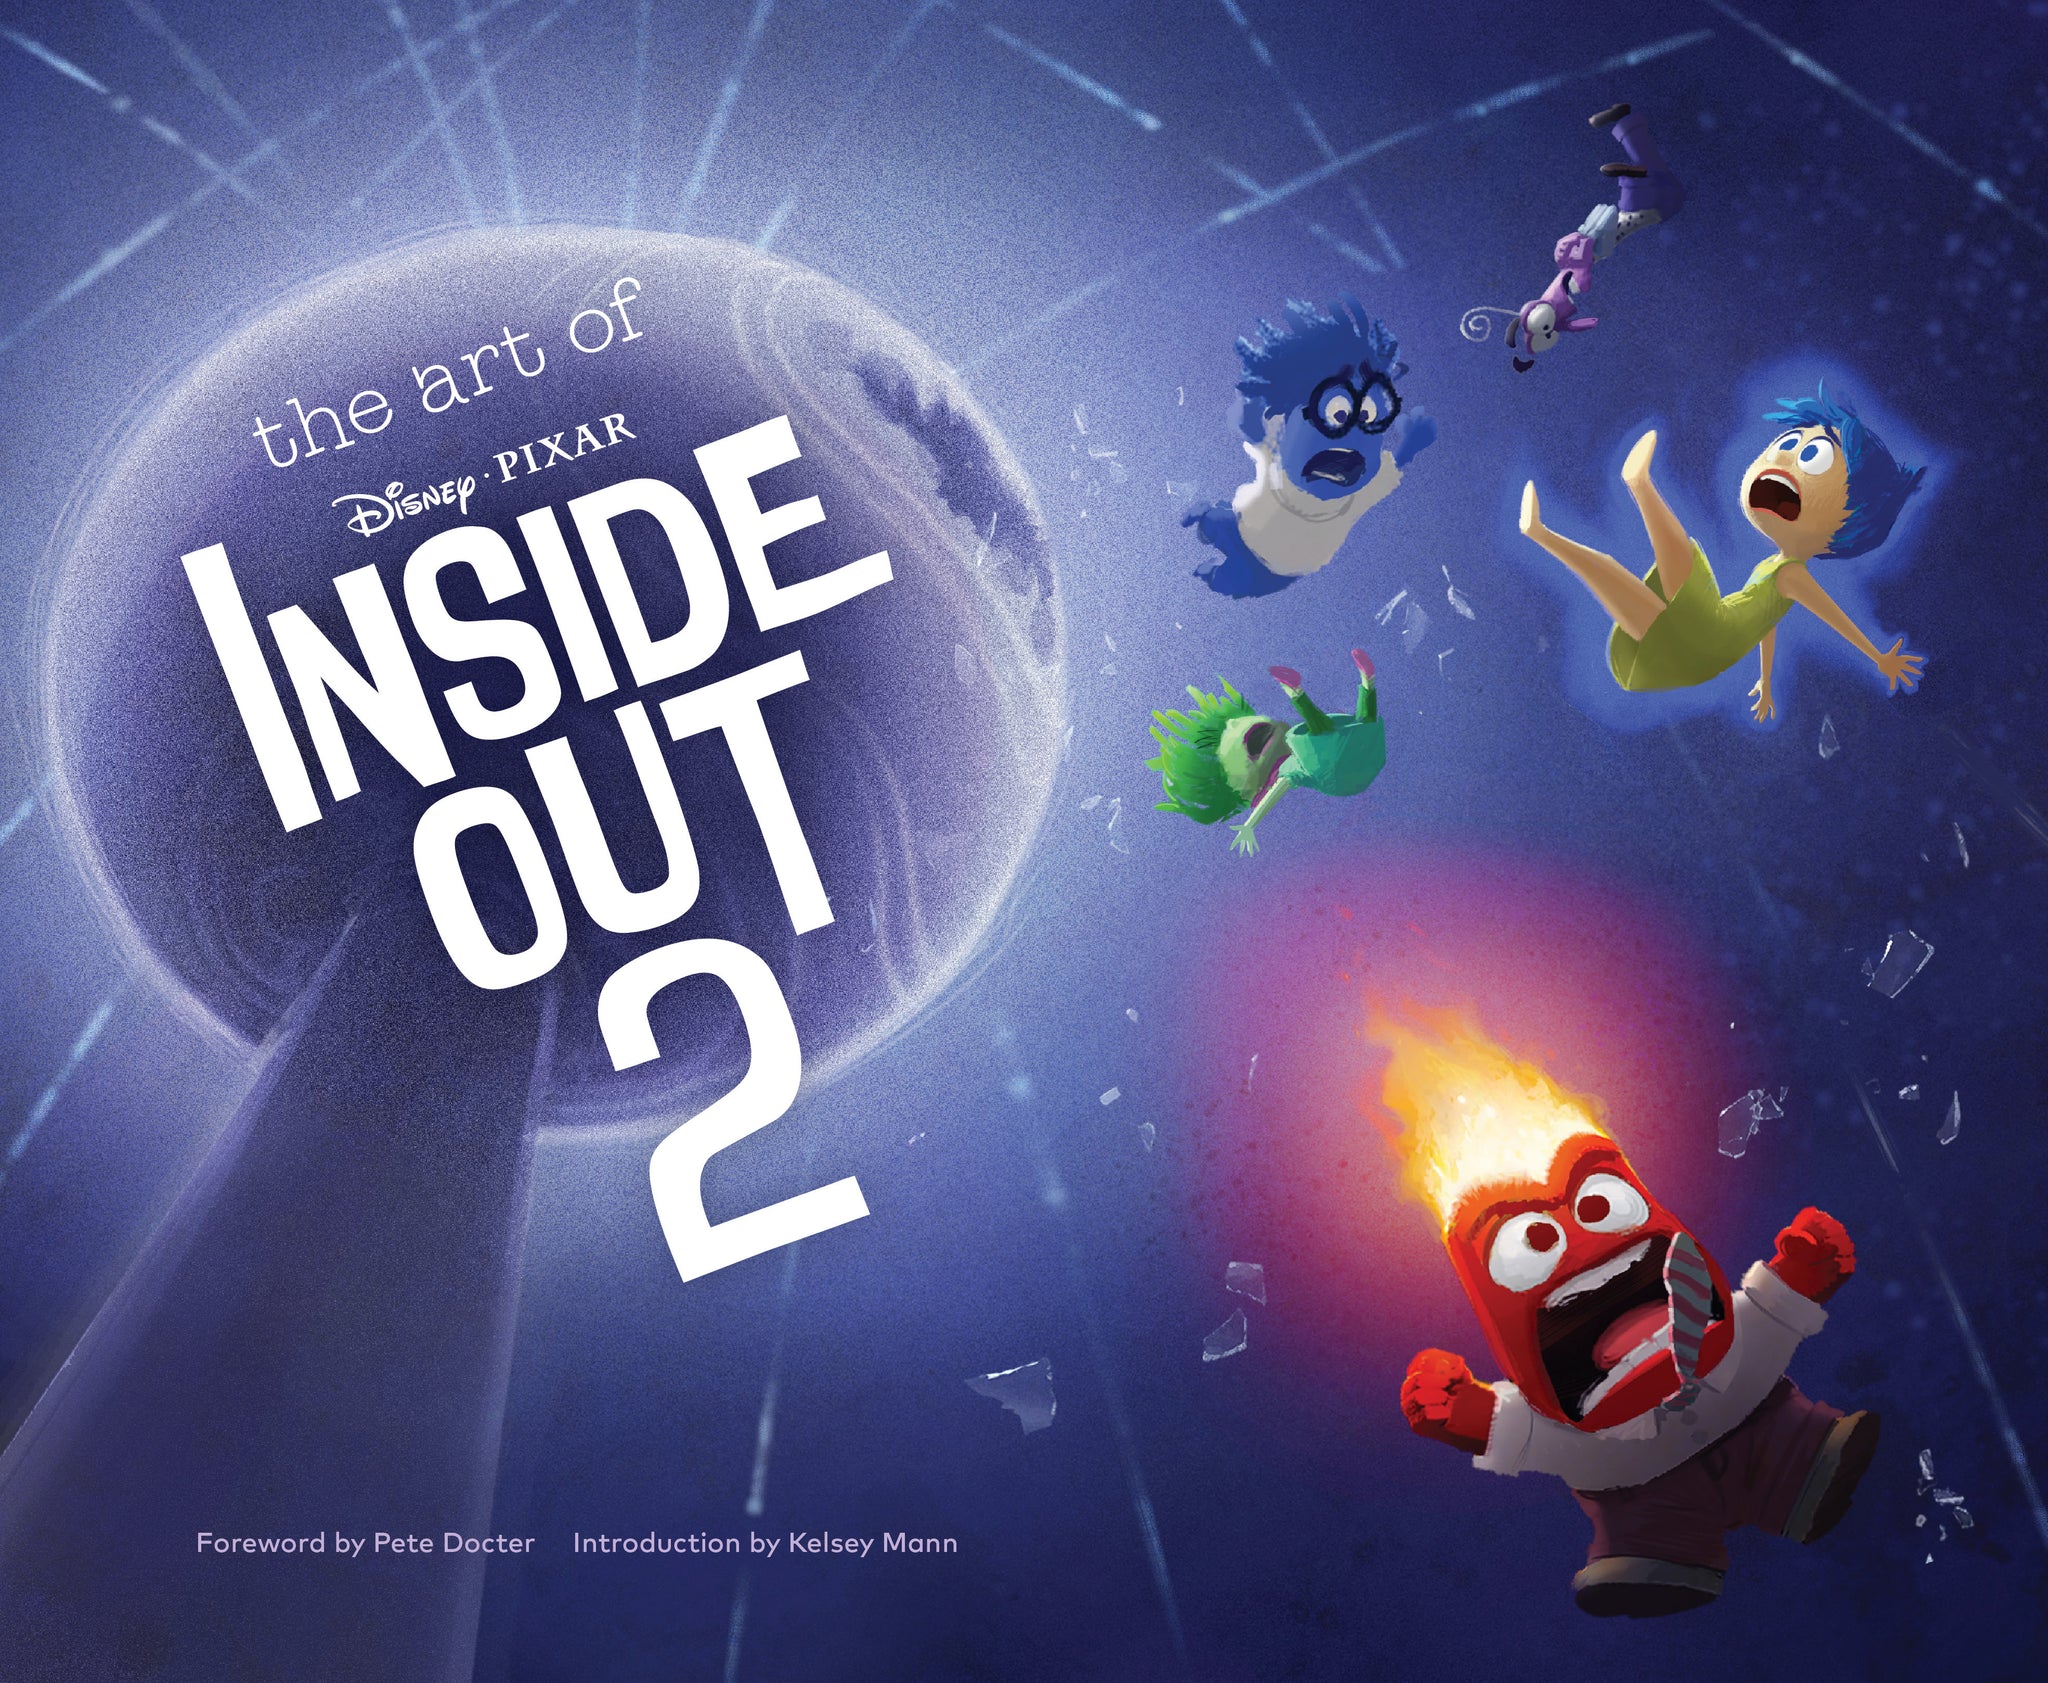 Art of Inside Out 2